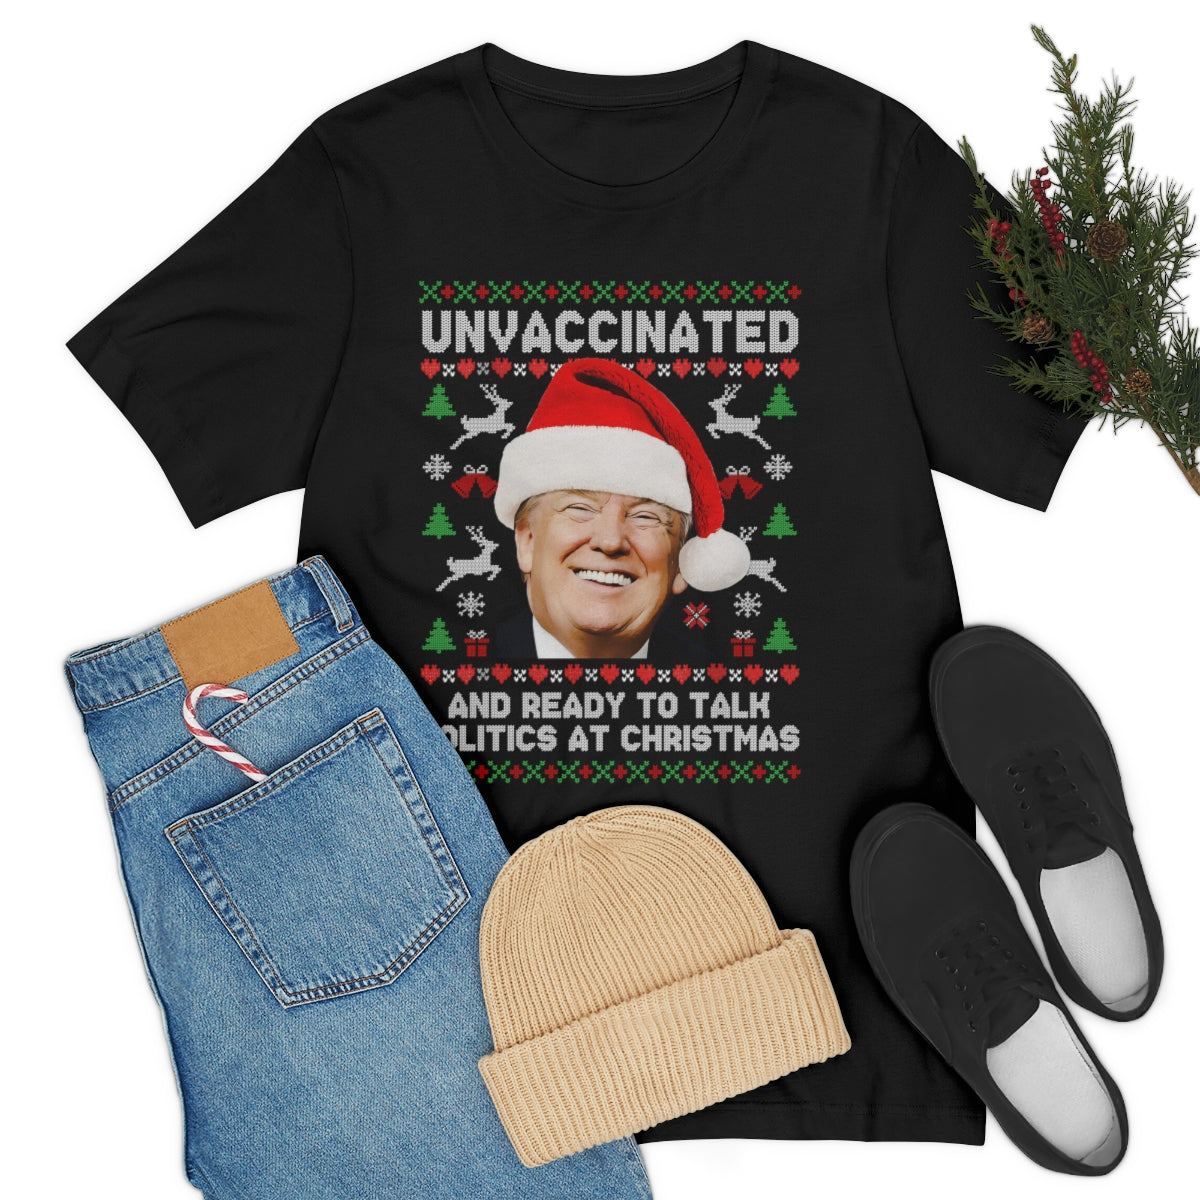 Unvaccinated and Ready To Talk Politics at Christmas | Mens/Unisex Short Sleeve T-Shirt - Rise of The New Media